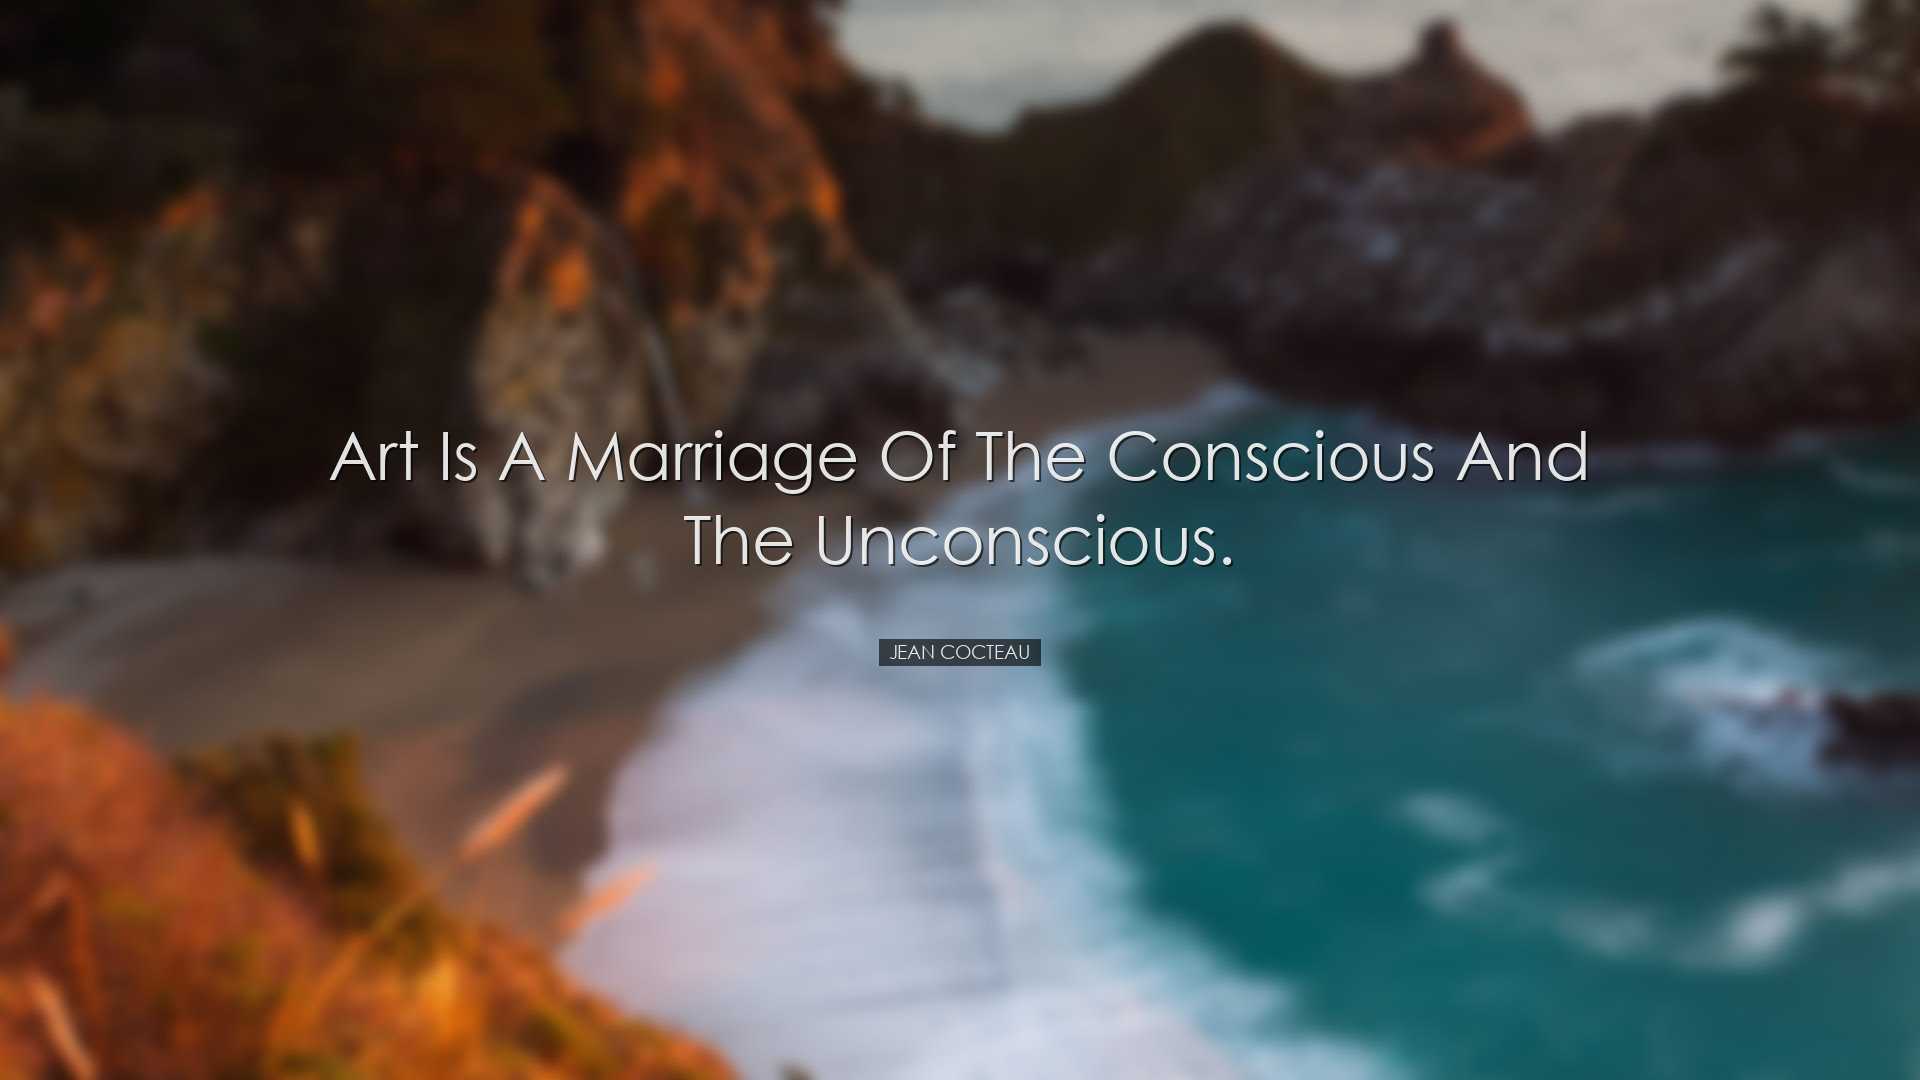 Art is a marriage of the conscious and the unconscious. - Jean Coc